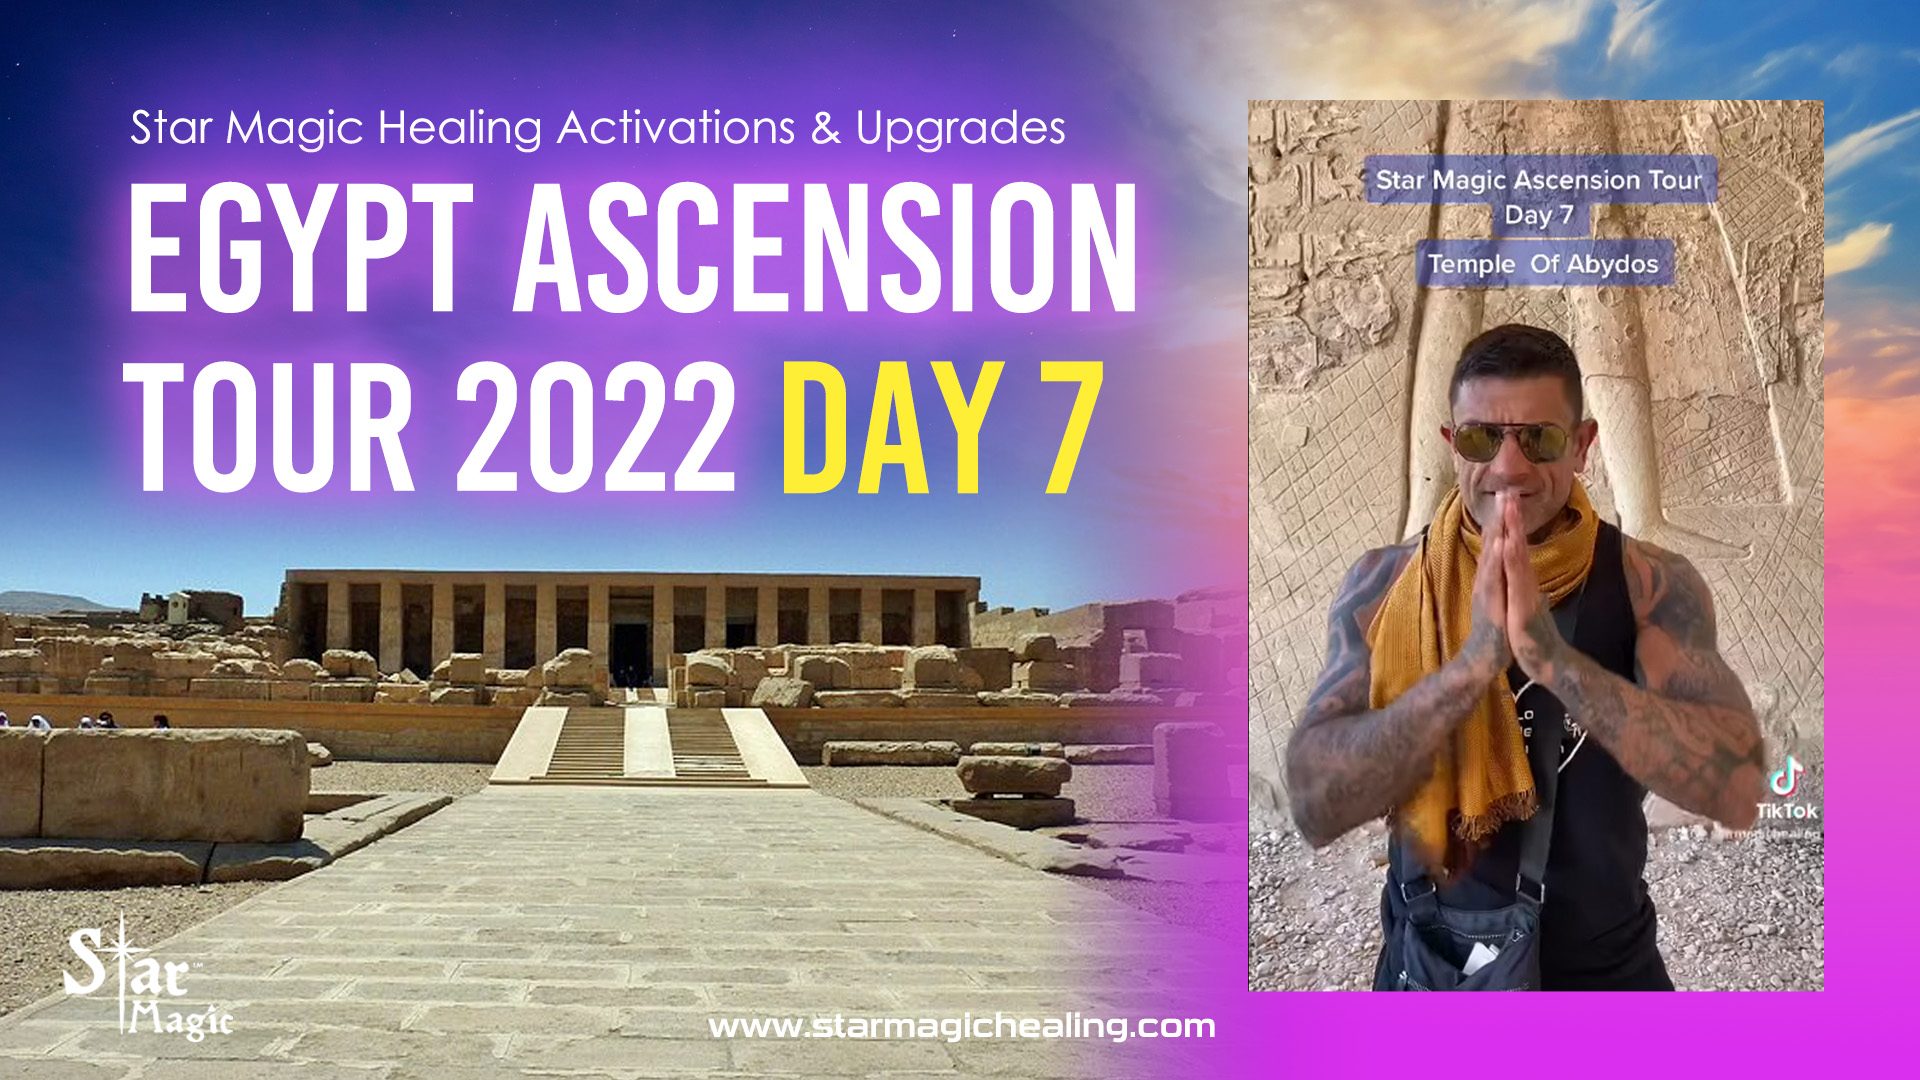 Star Magic Egypt Ascension Tour Day 7 – Activations & Upgrades